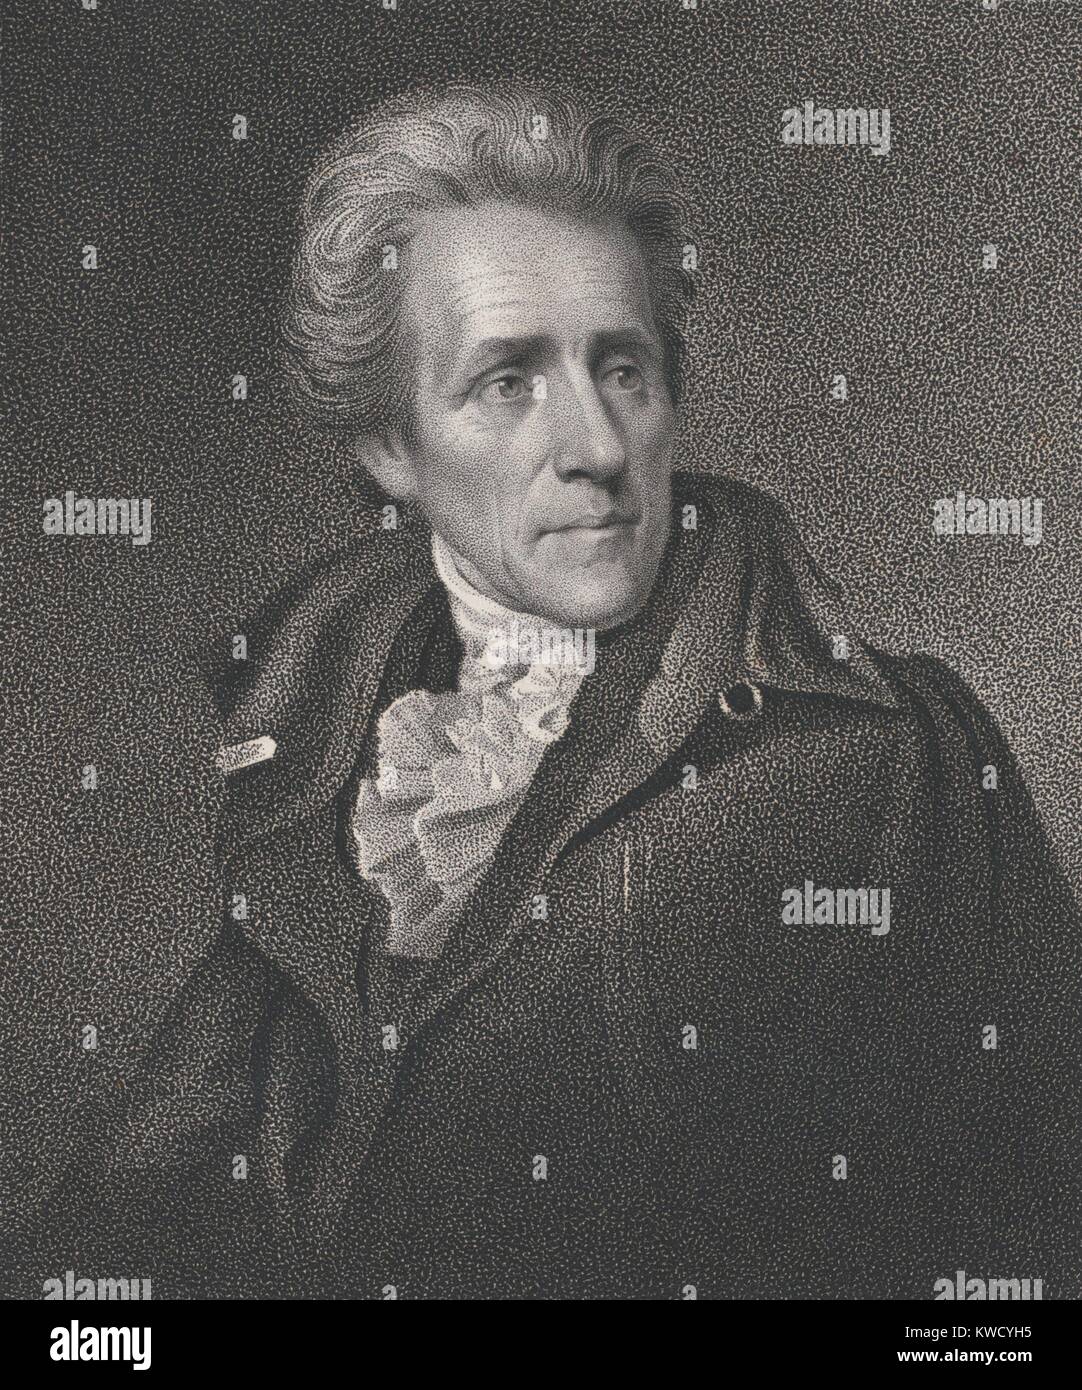 Senator Andrew Jackson in 1824, as painted by Joseph Wood, and engraved by James Longacre. The original miniature painting is now lost (BSLOC 2017 6 10) Stock Photo